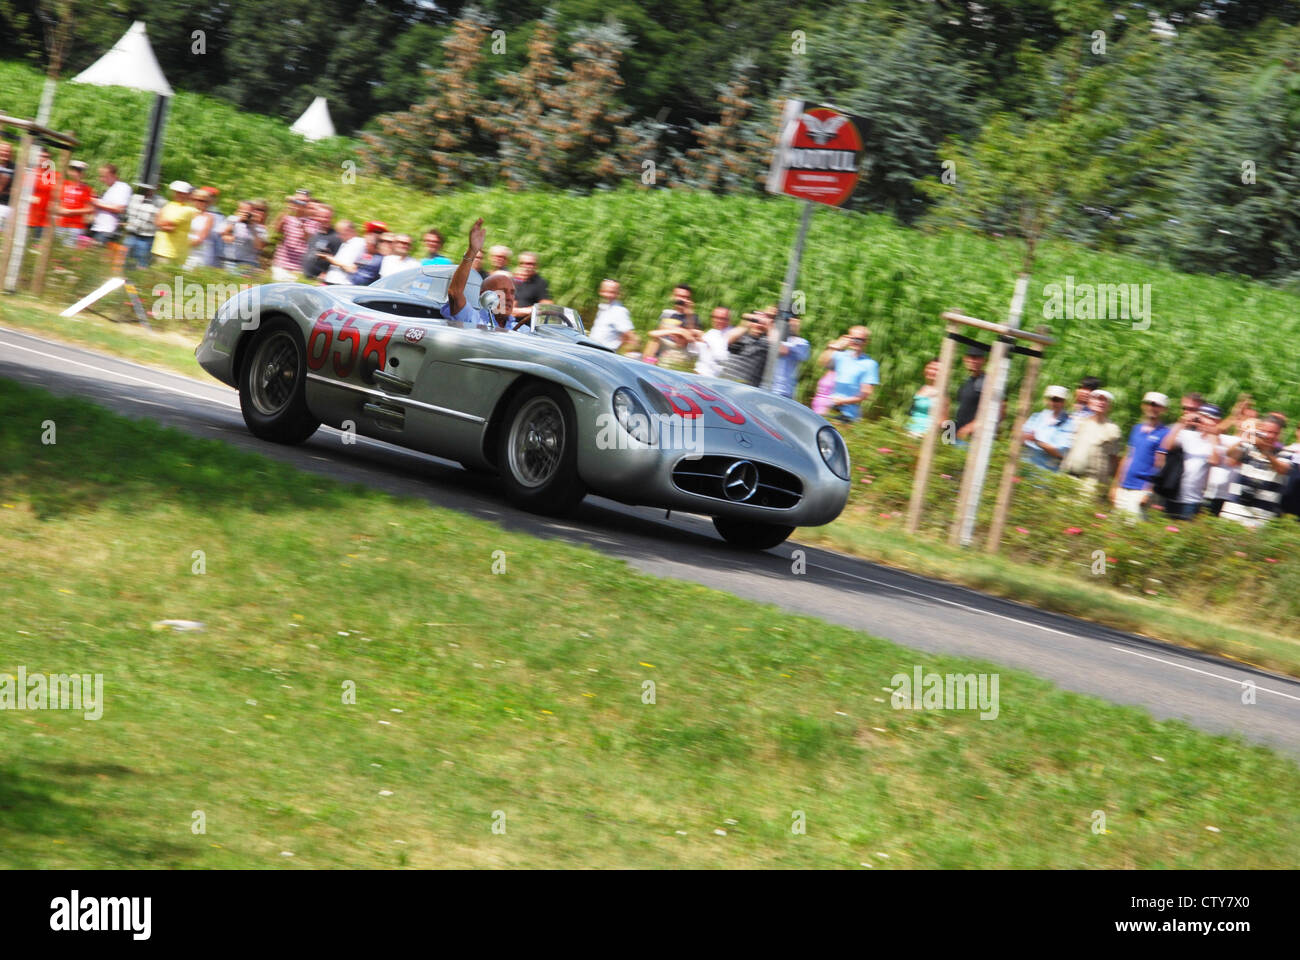 Stirling Moss in 1955 Mercedes-Benz 300 SLR at Classic Days 2012, Schloss Dyck Germany Stock Photo